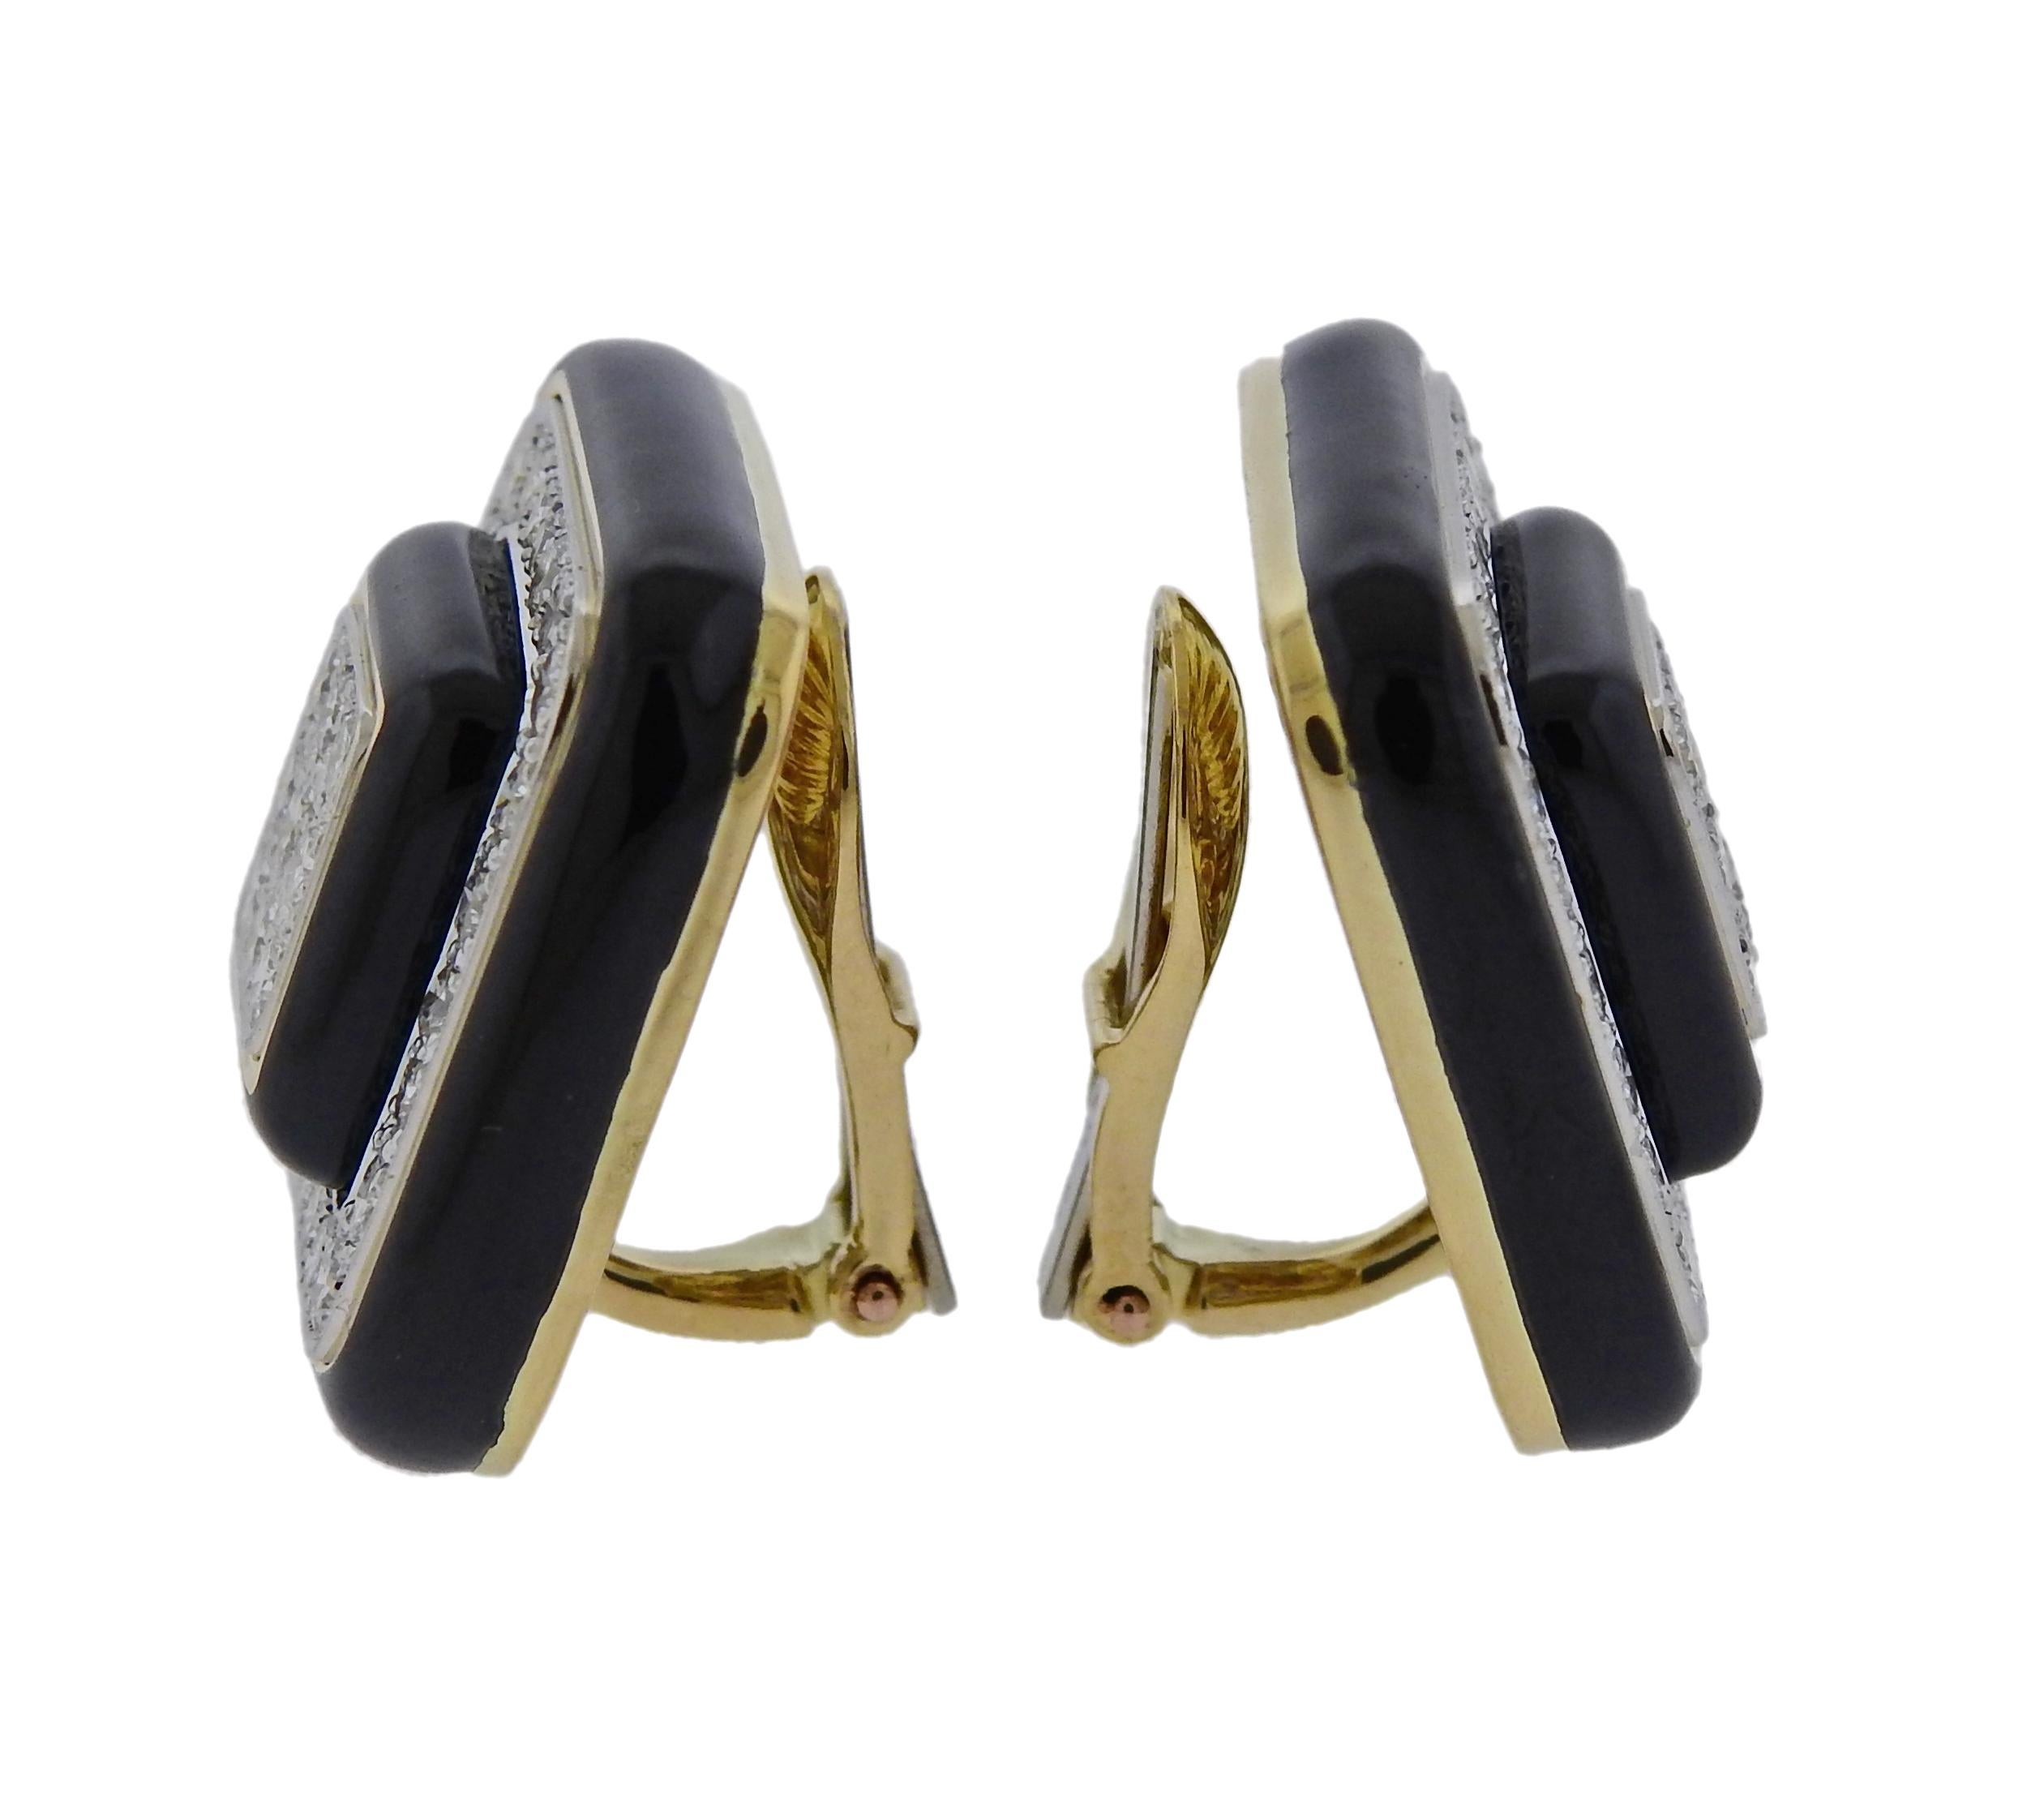 Pair of 18k gold and platinum earrings, crafted by David Webb, set with black enamel and approx. 3.30ctw in H/VS diamonds. Earrings are 23mm x 23mm and weigh 33.9 grams. Marked Webb, Plat, 18k